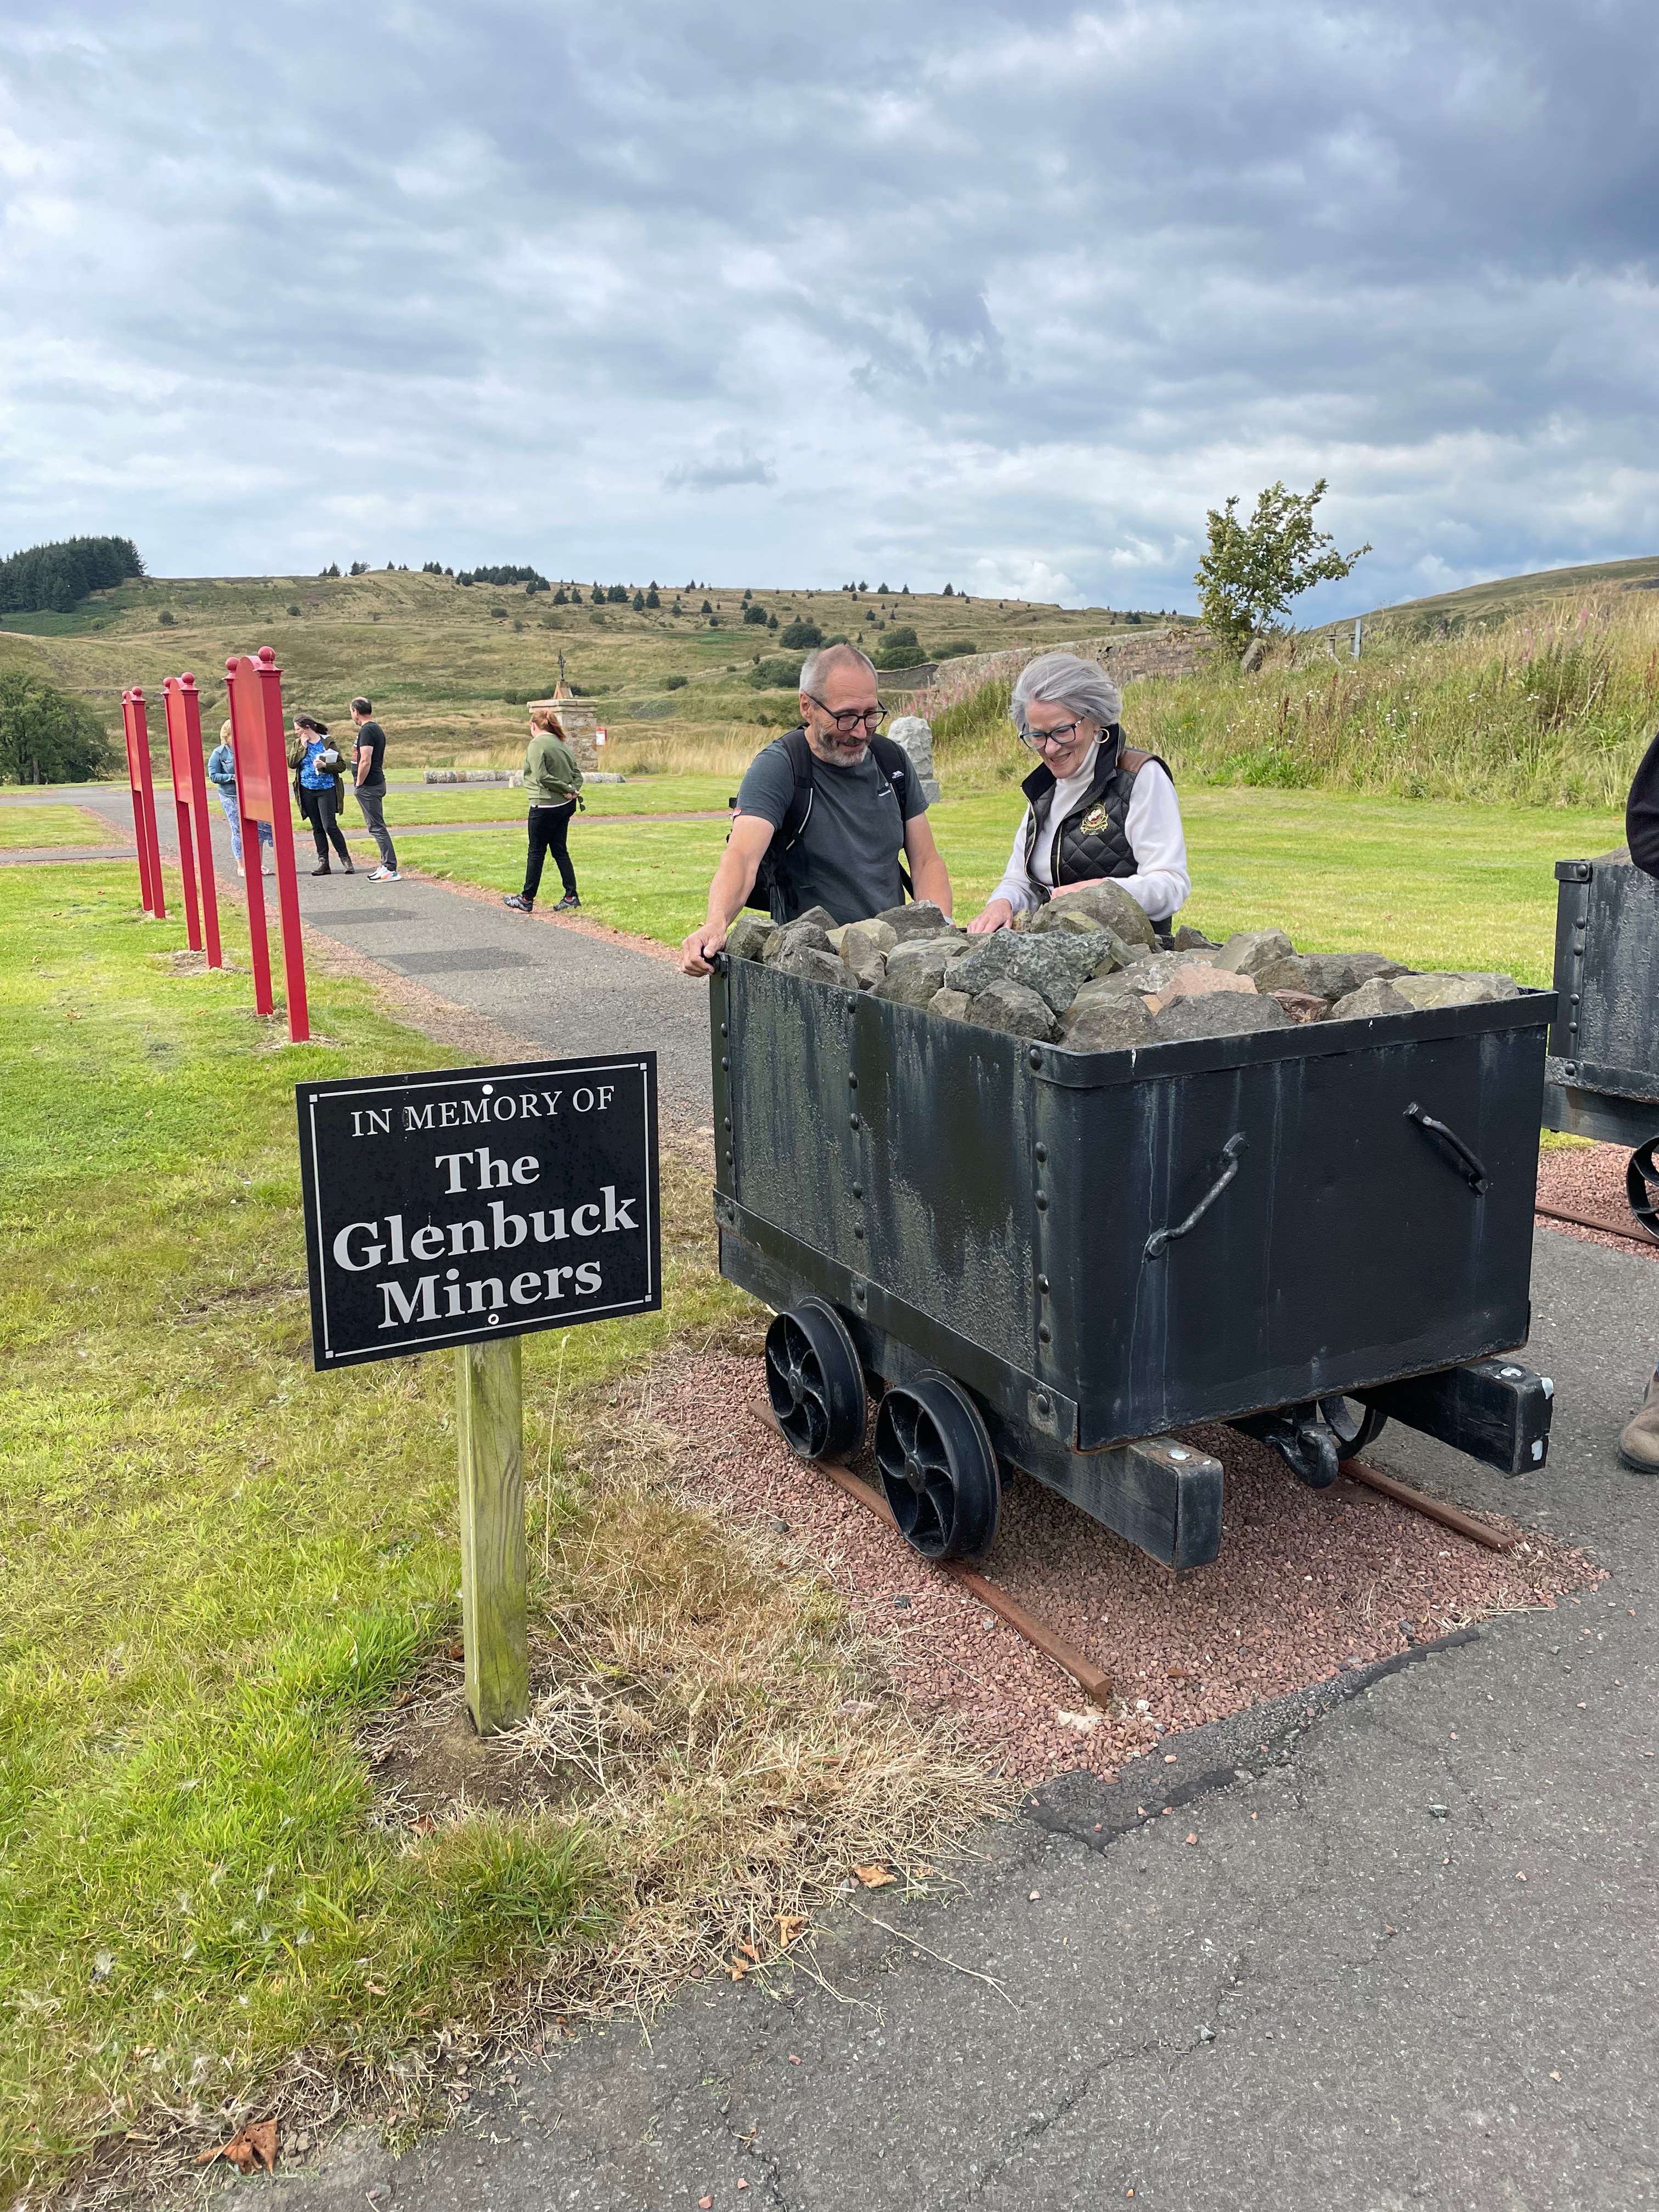 Two figures, one male and one female, looking a mining cart filled with stones next to a sign saying 'In Memory of the Glenbuck Miners'